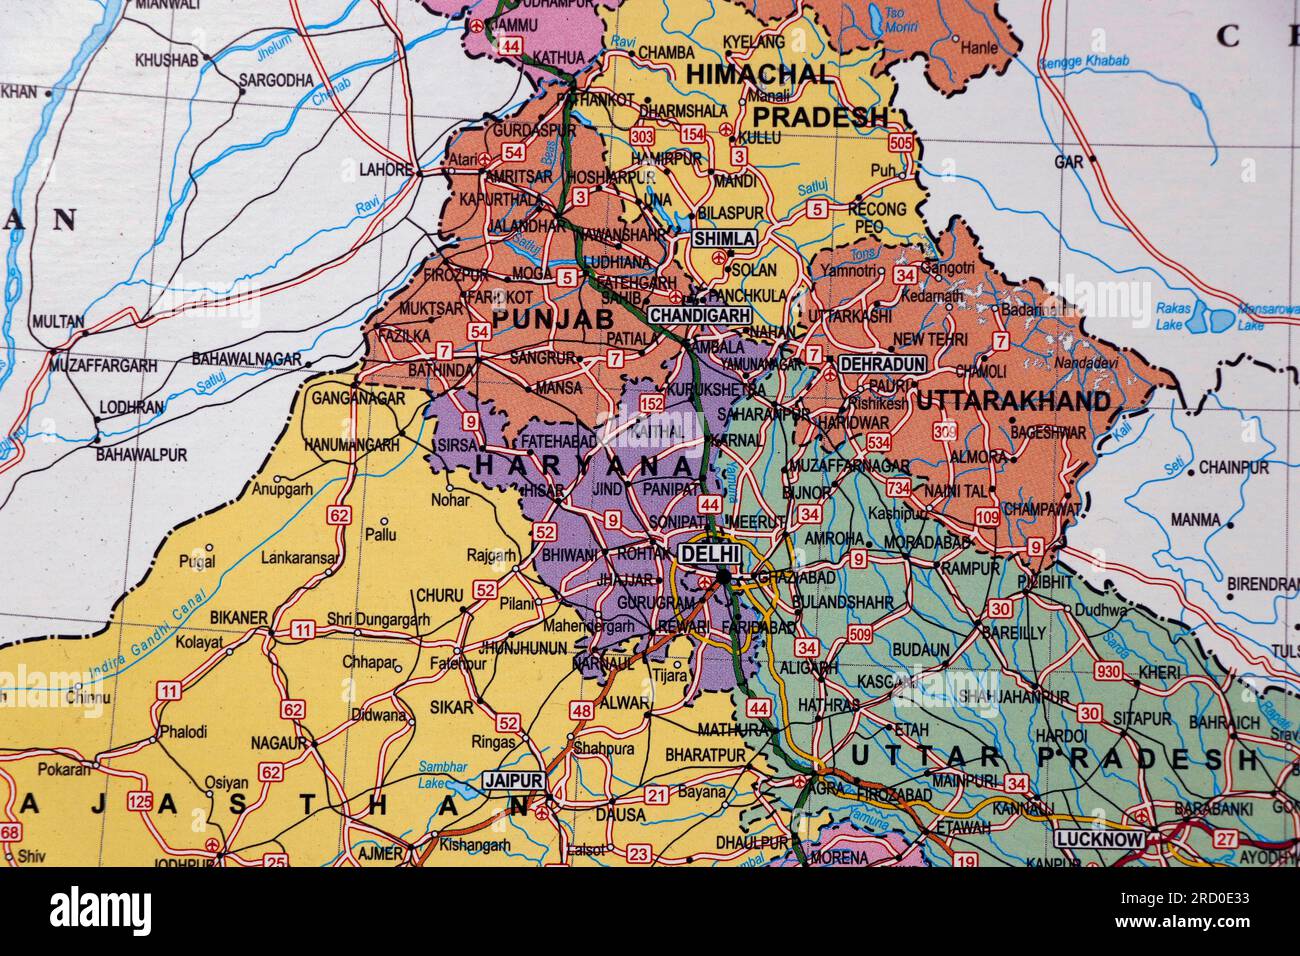 north india map with state borders, delhi, punjab, haryana in close up Stock Photo